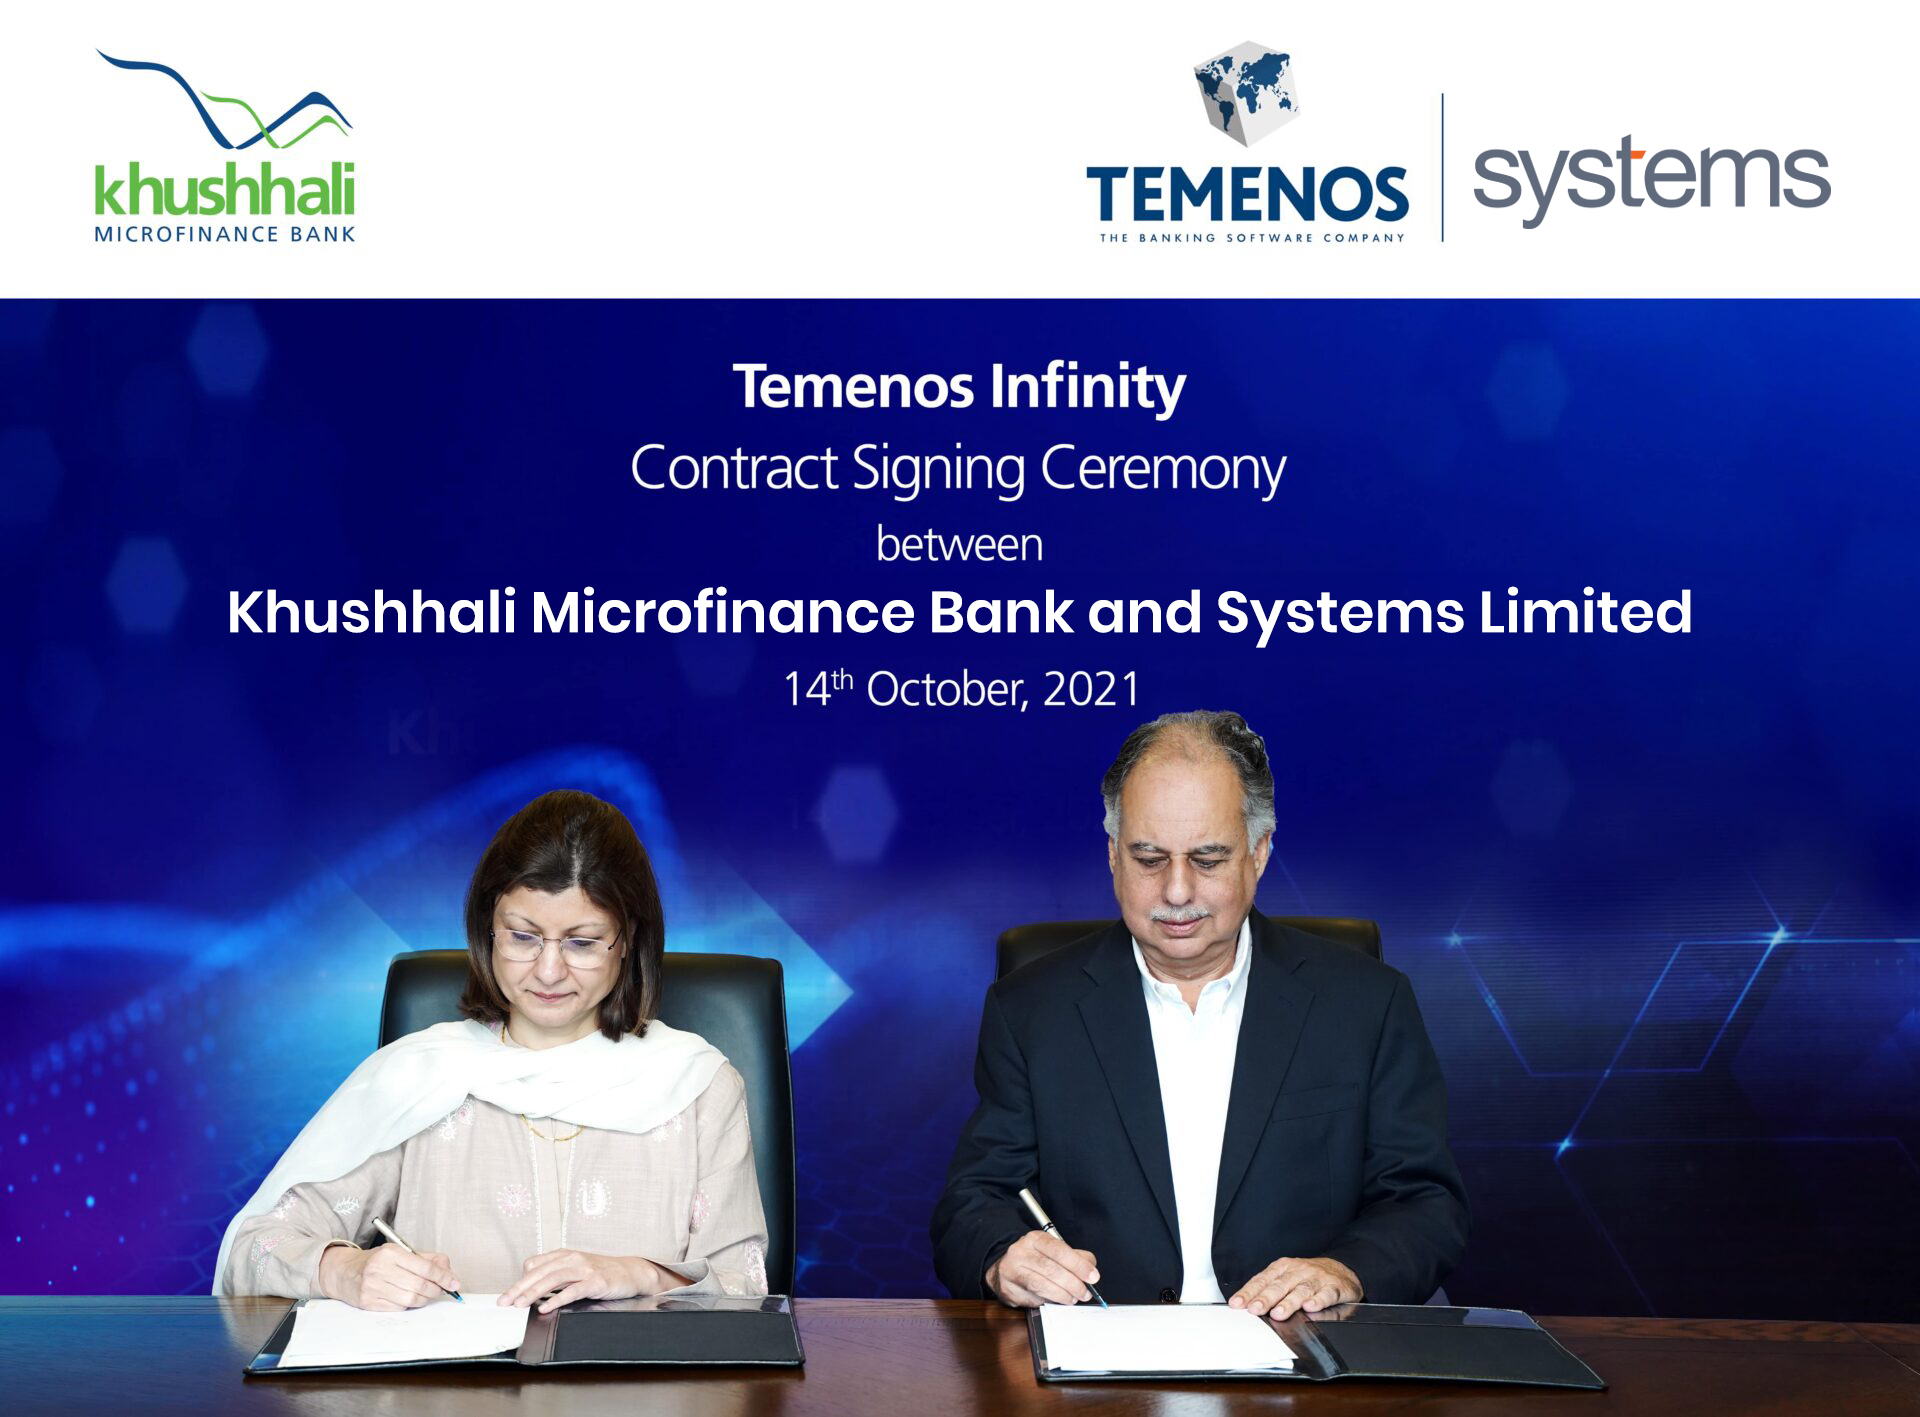 Khushhali Microfinance Bank boosts its digital banking prowess in partnership with Temenos and Systems Limited 